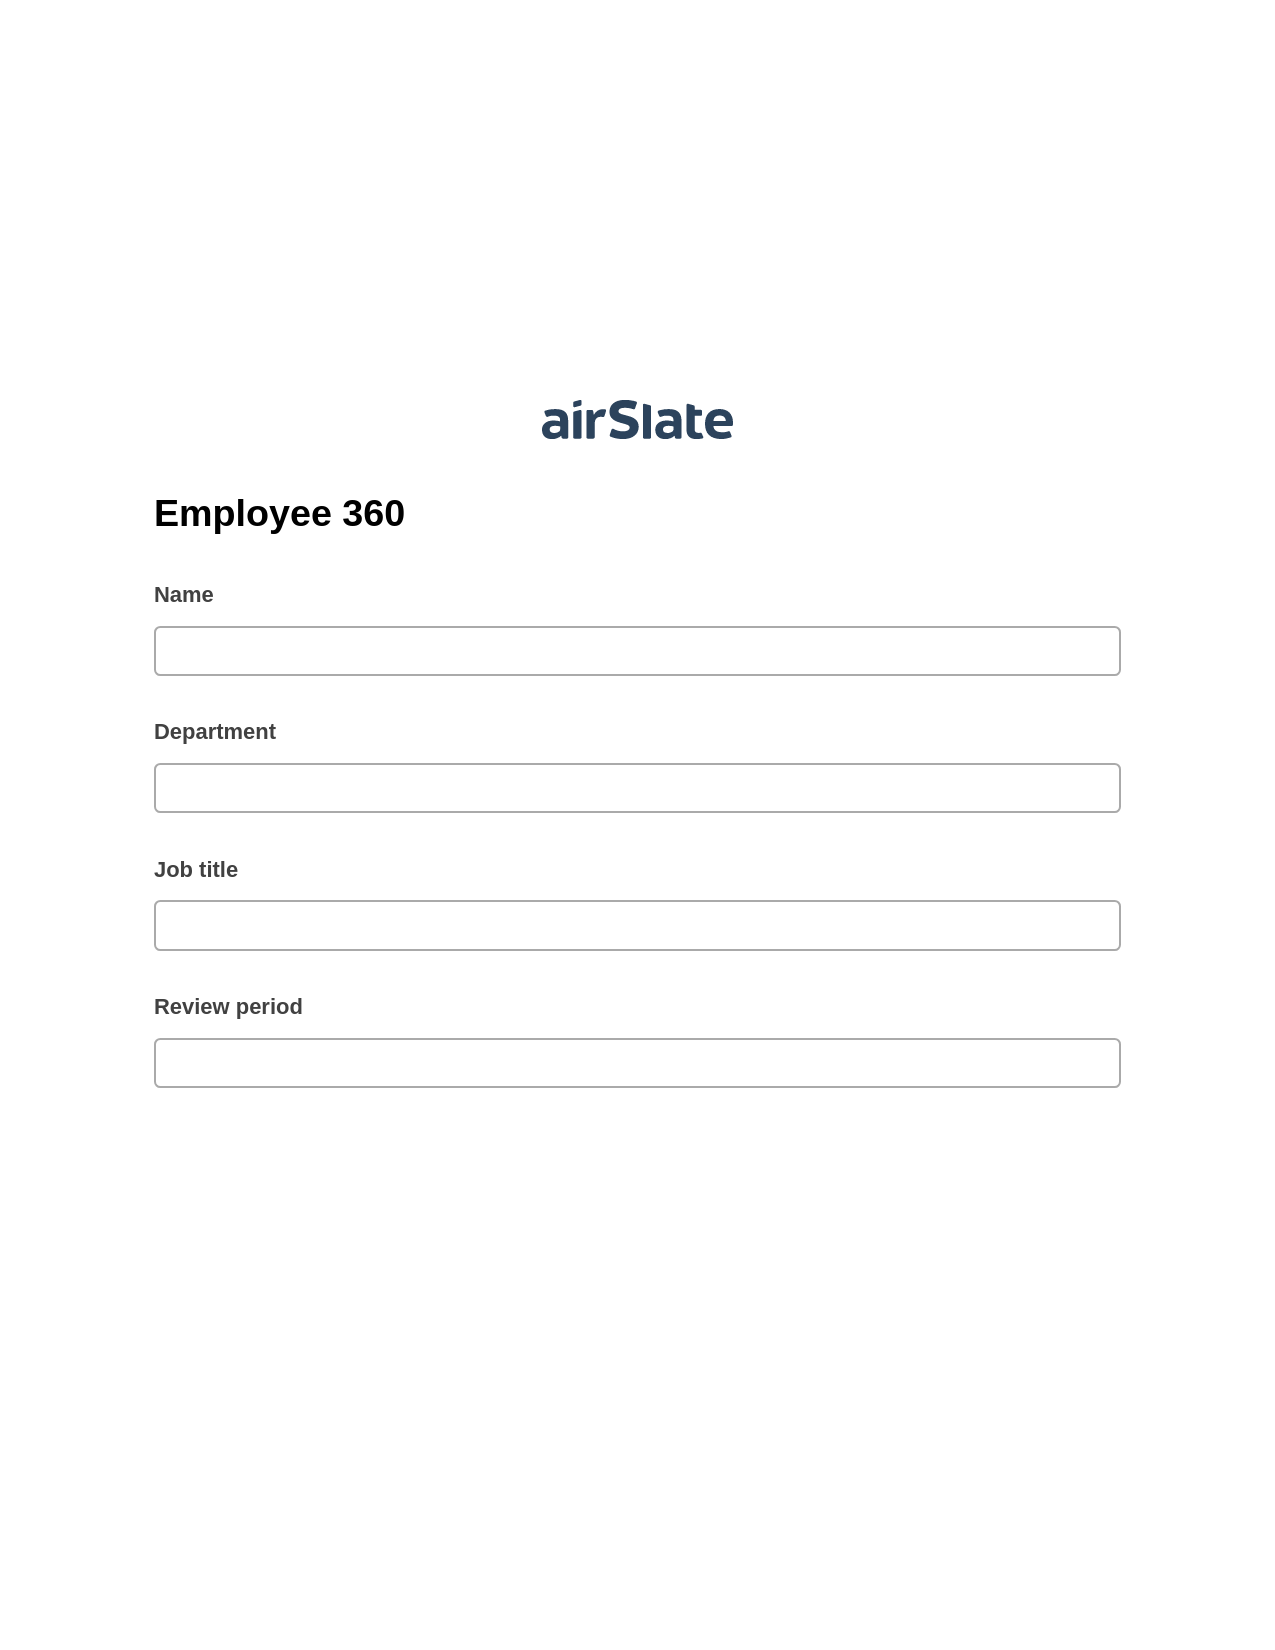 Employee 360 Pre-fill Document Bot, Update MS Dynamics 365 Record Bot, Archive to Dropbox Bot